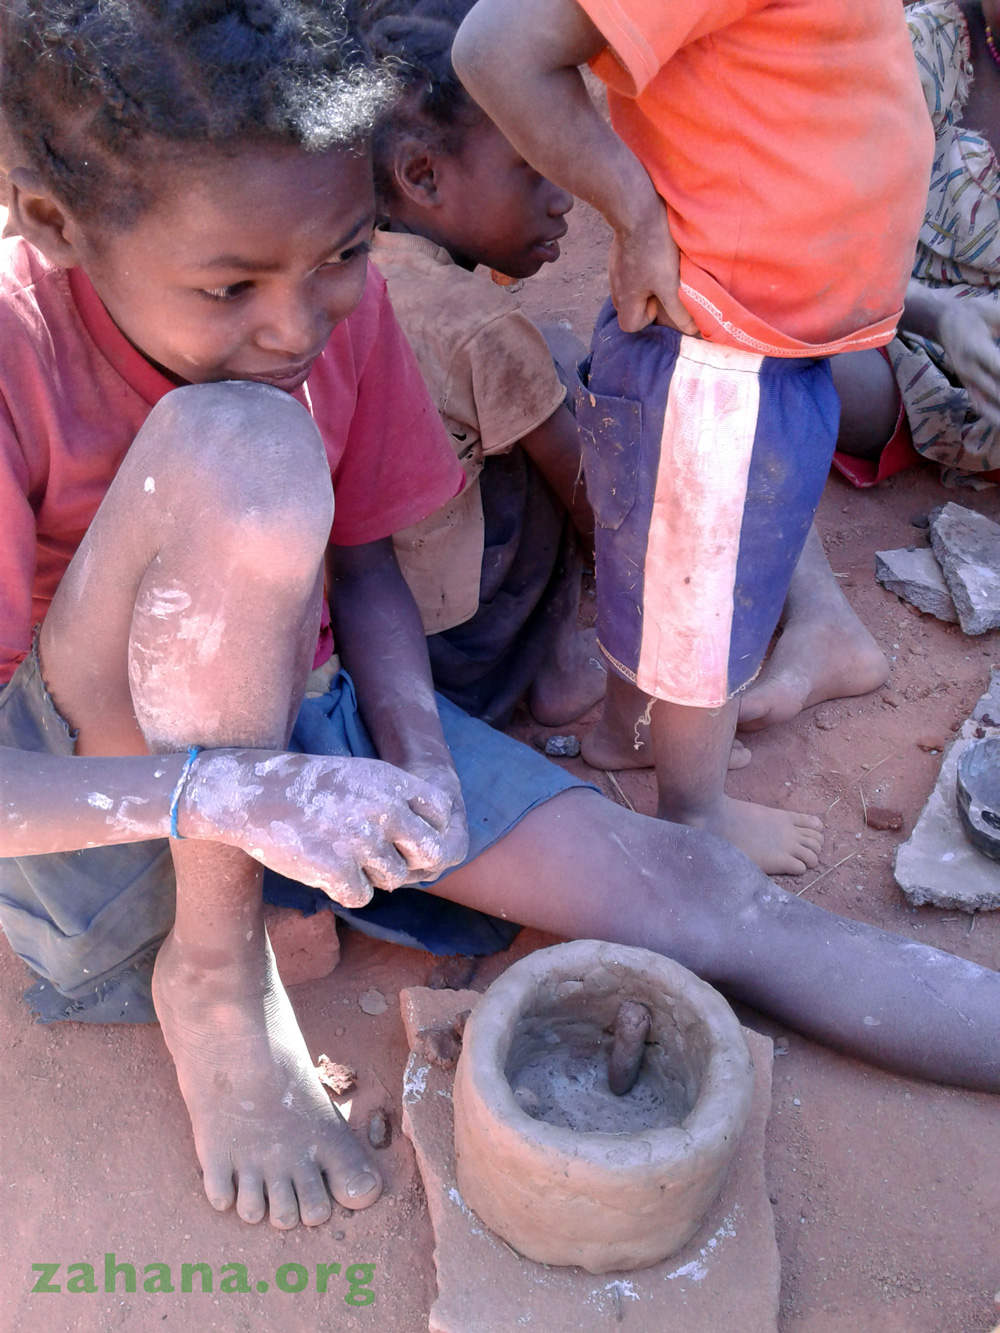 Improved cookstove in Madagascar as a child's toy